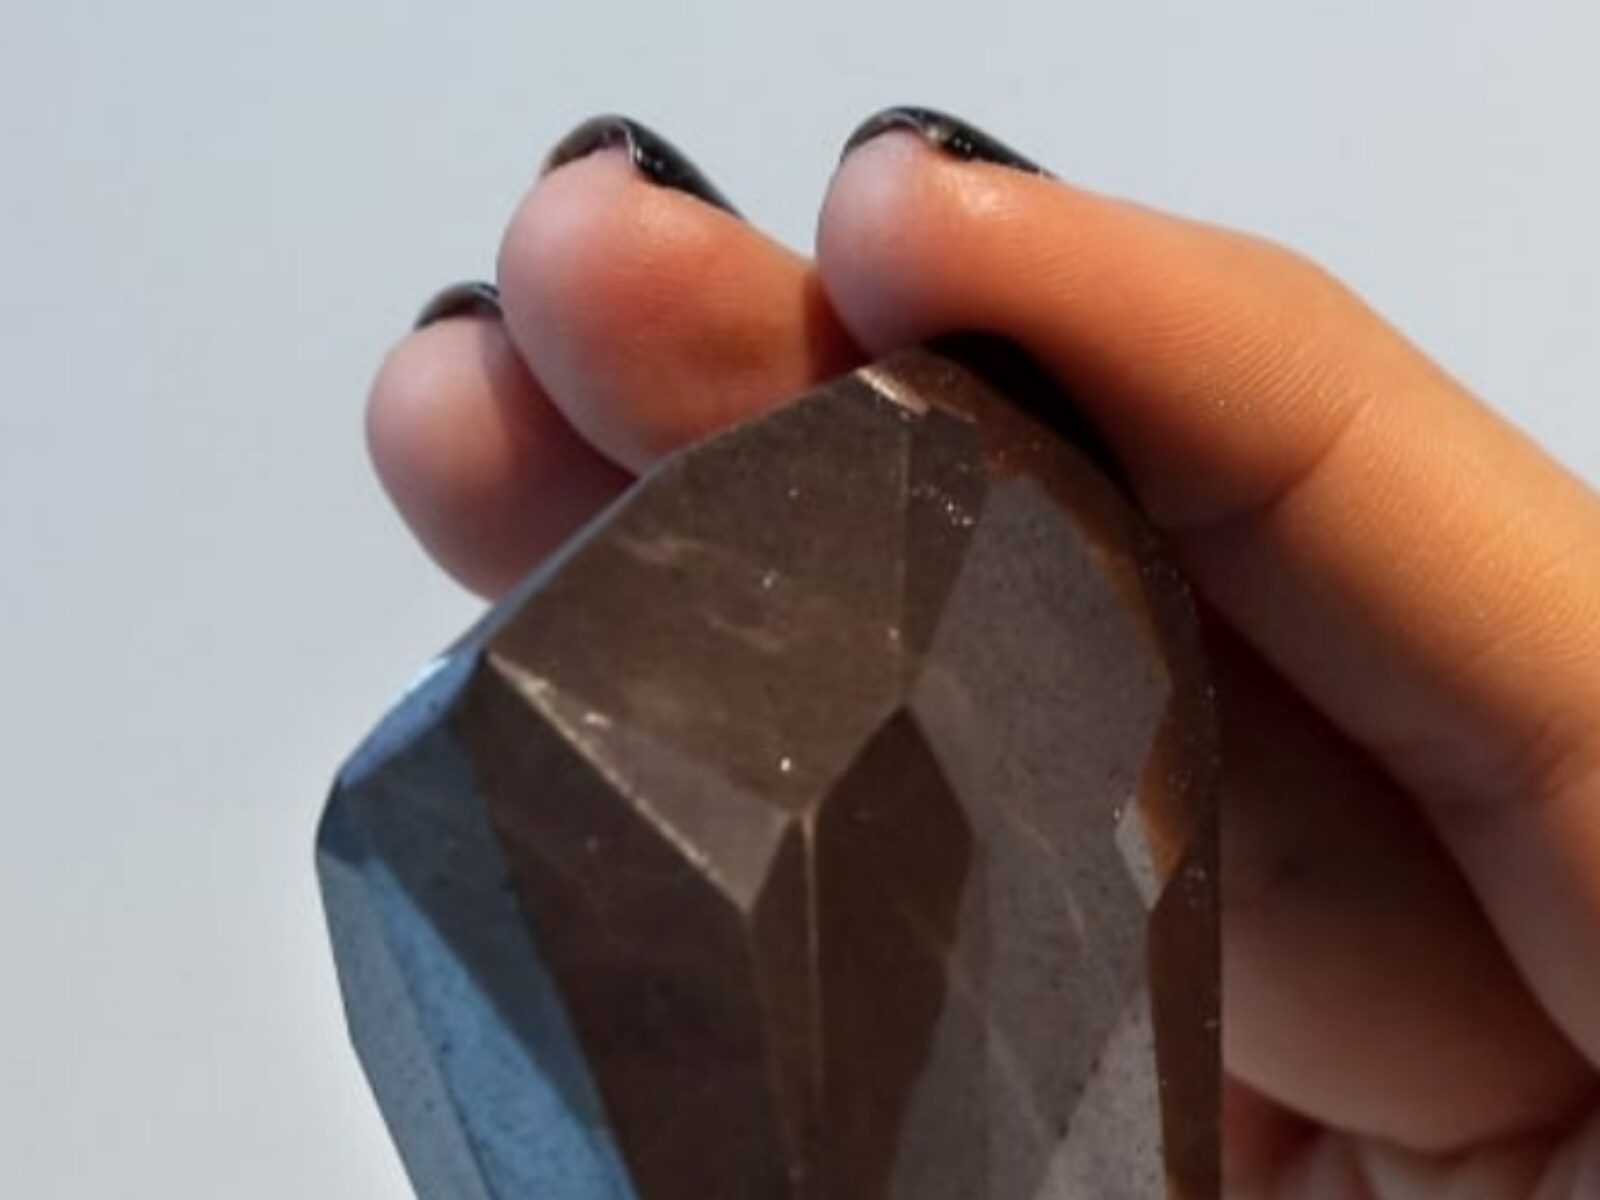 Enigma Black Diamond Sells For $4.3 Million At Auction